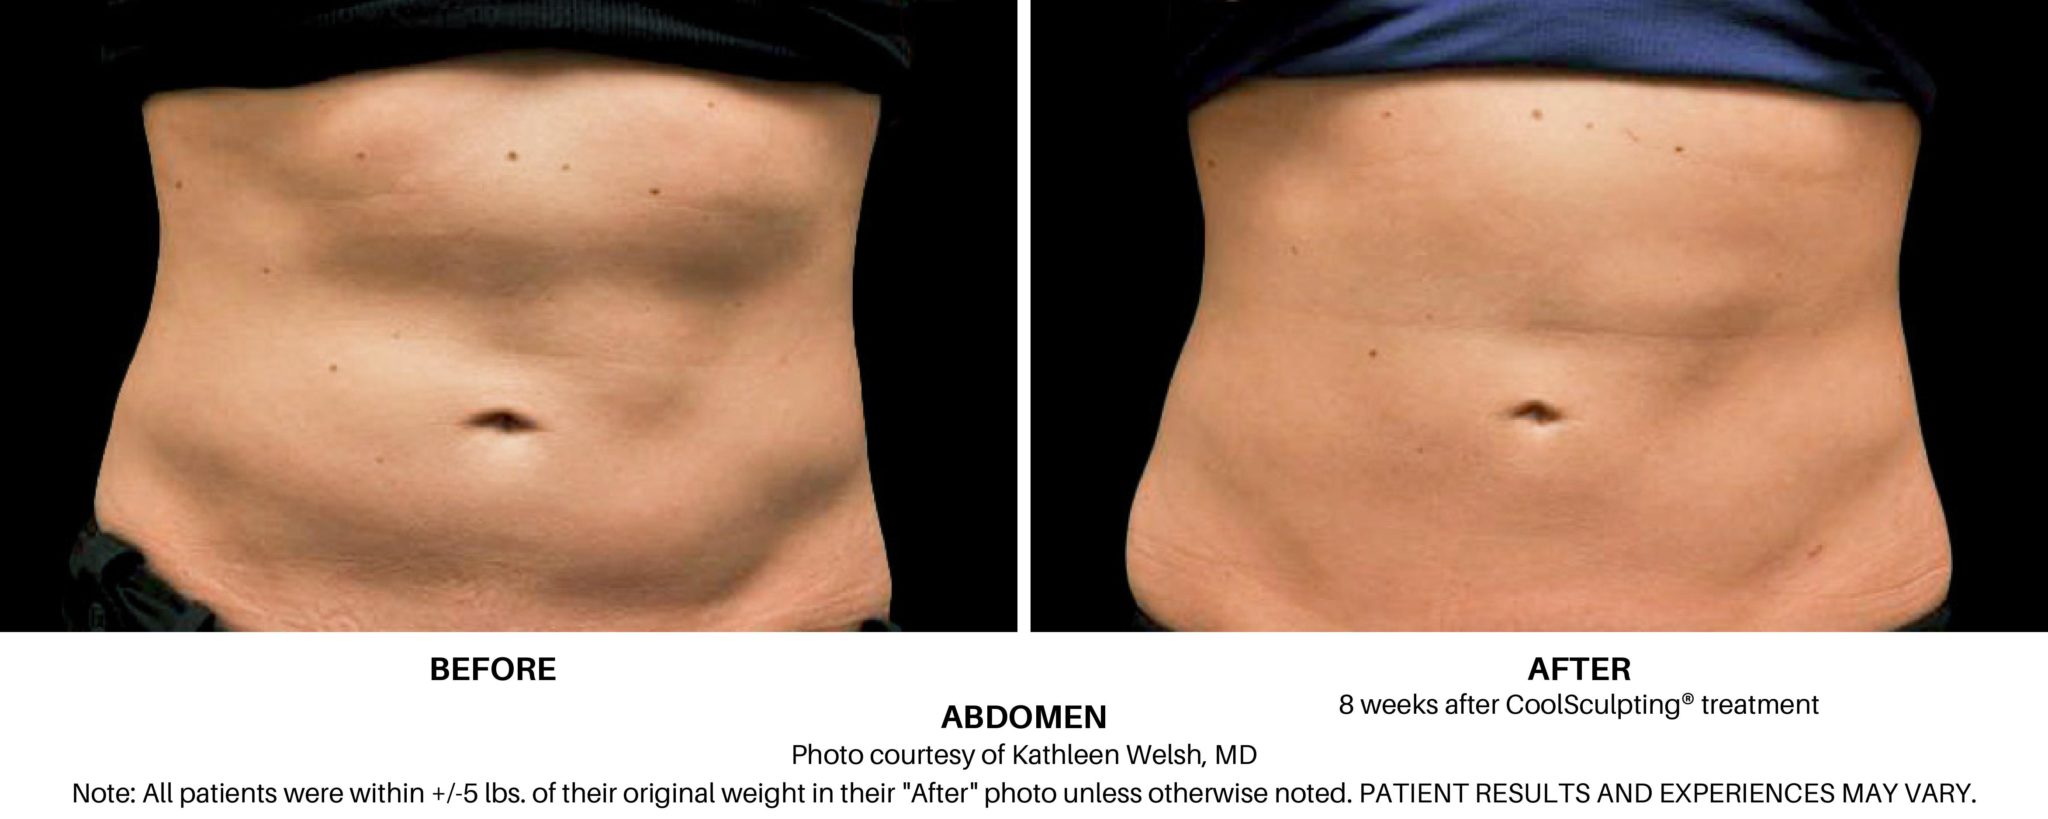 Does CoolSculpting Really Work? CoolSculpting Reviews